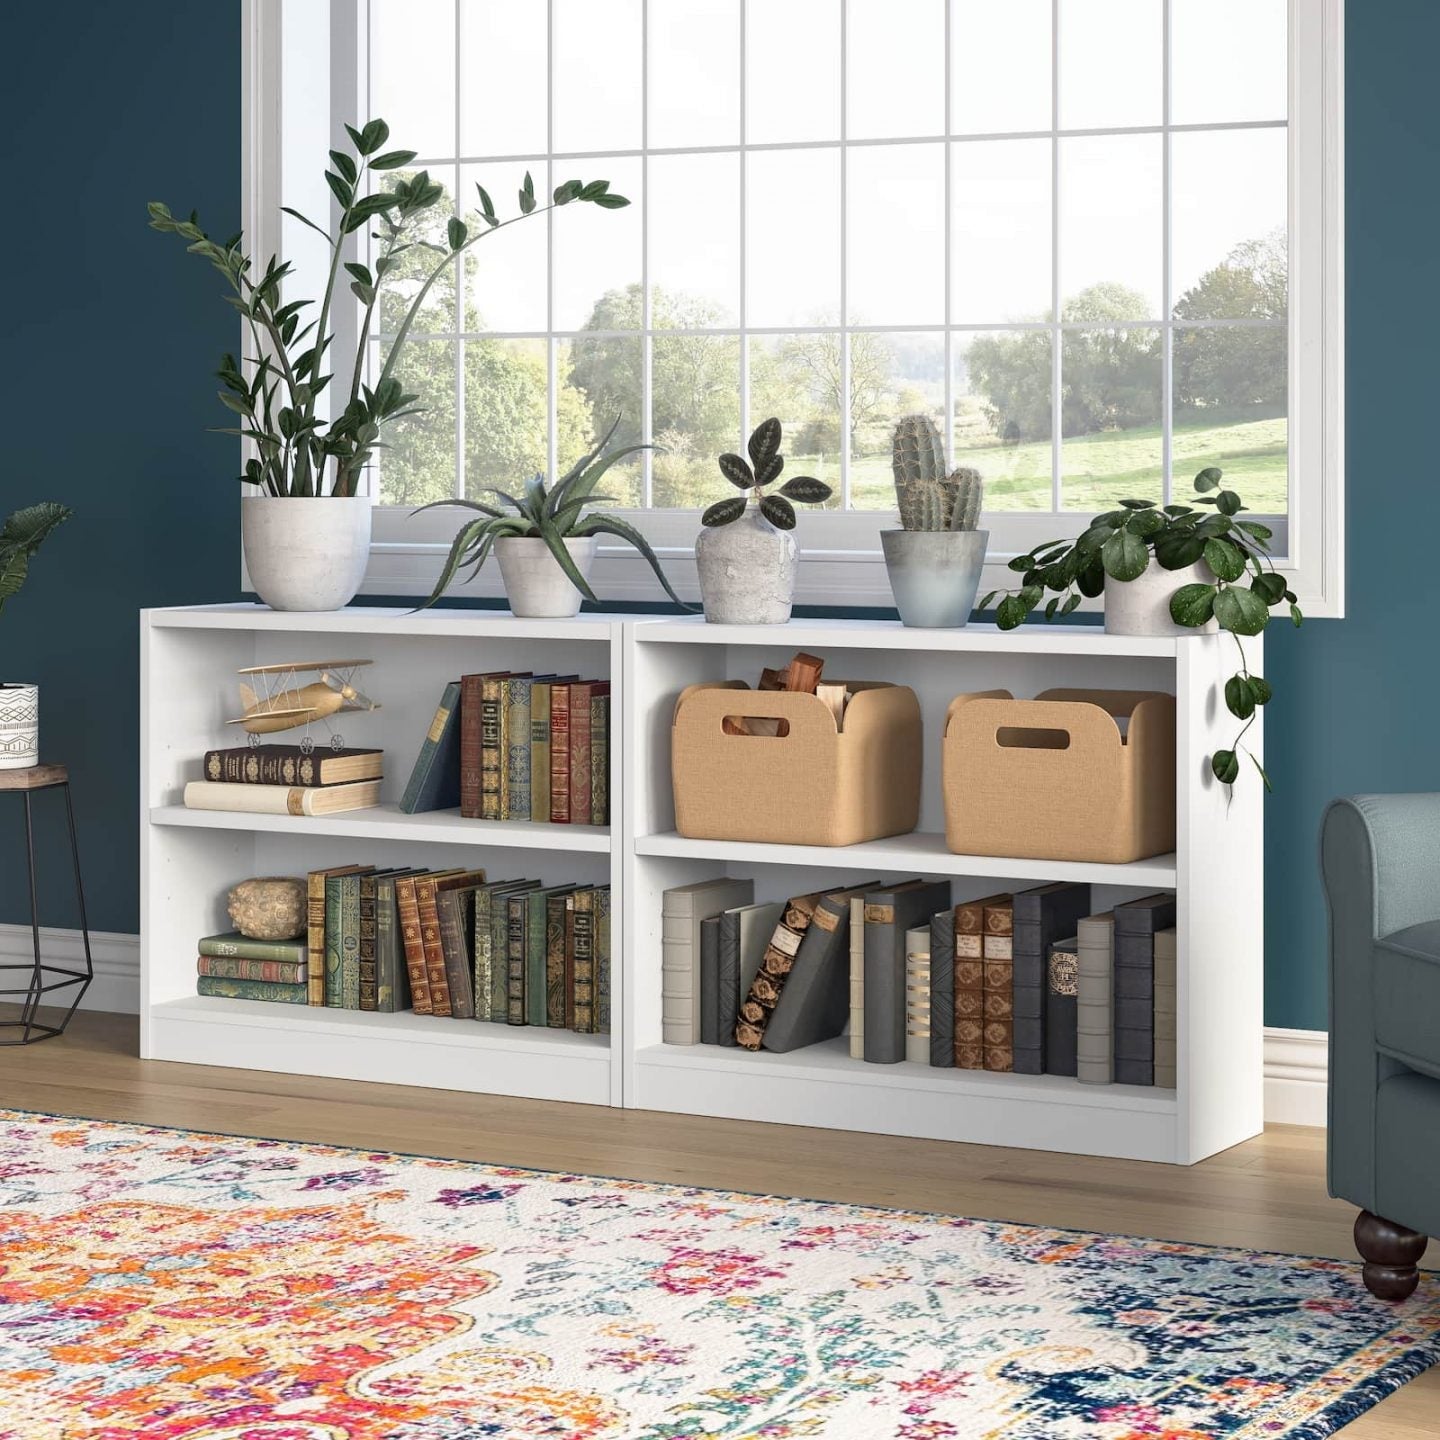 Explore Different Ways to Use a Horizontal Bookcase